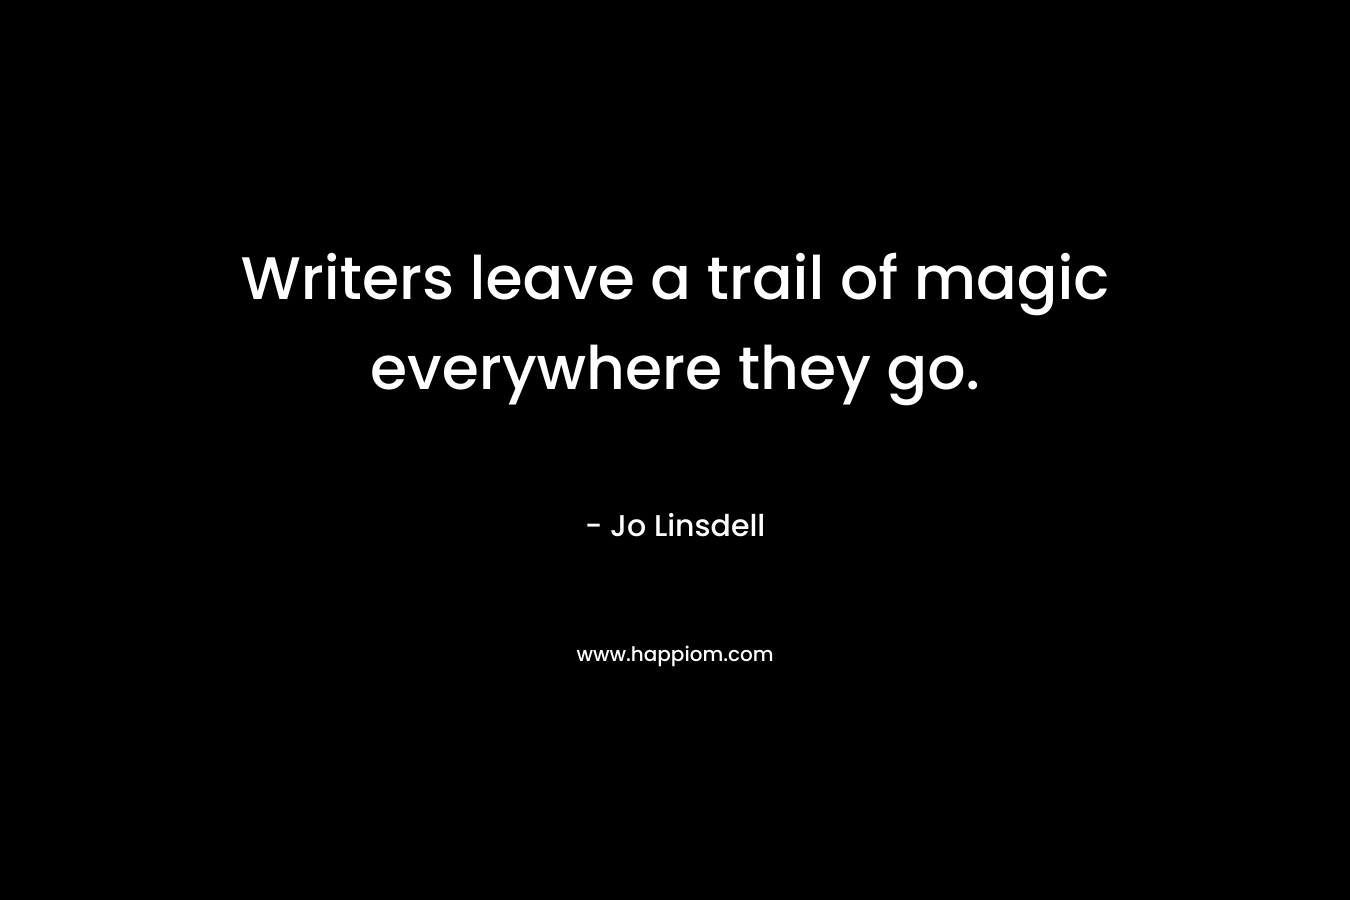 Writers leave a trail of magic everywhere they go.